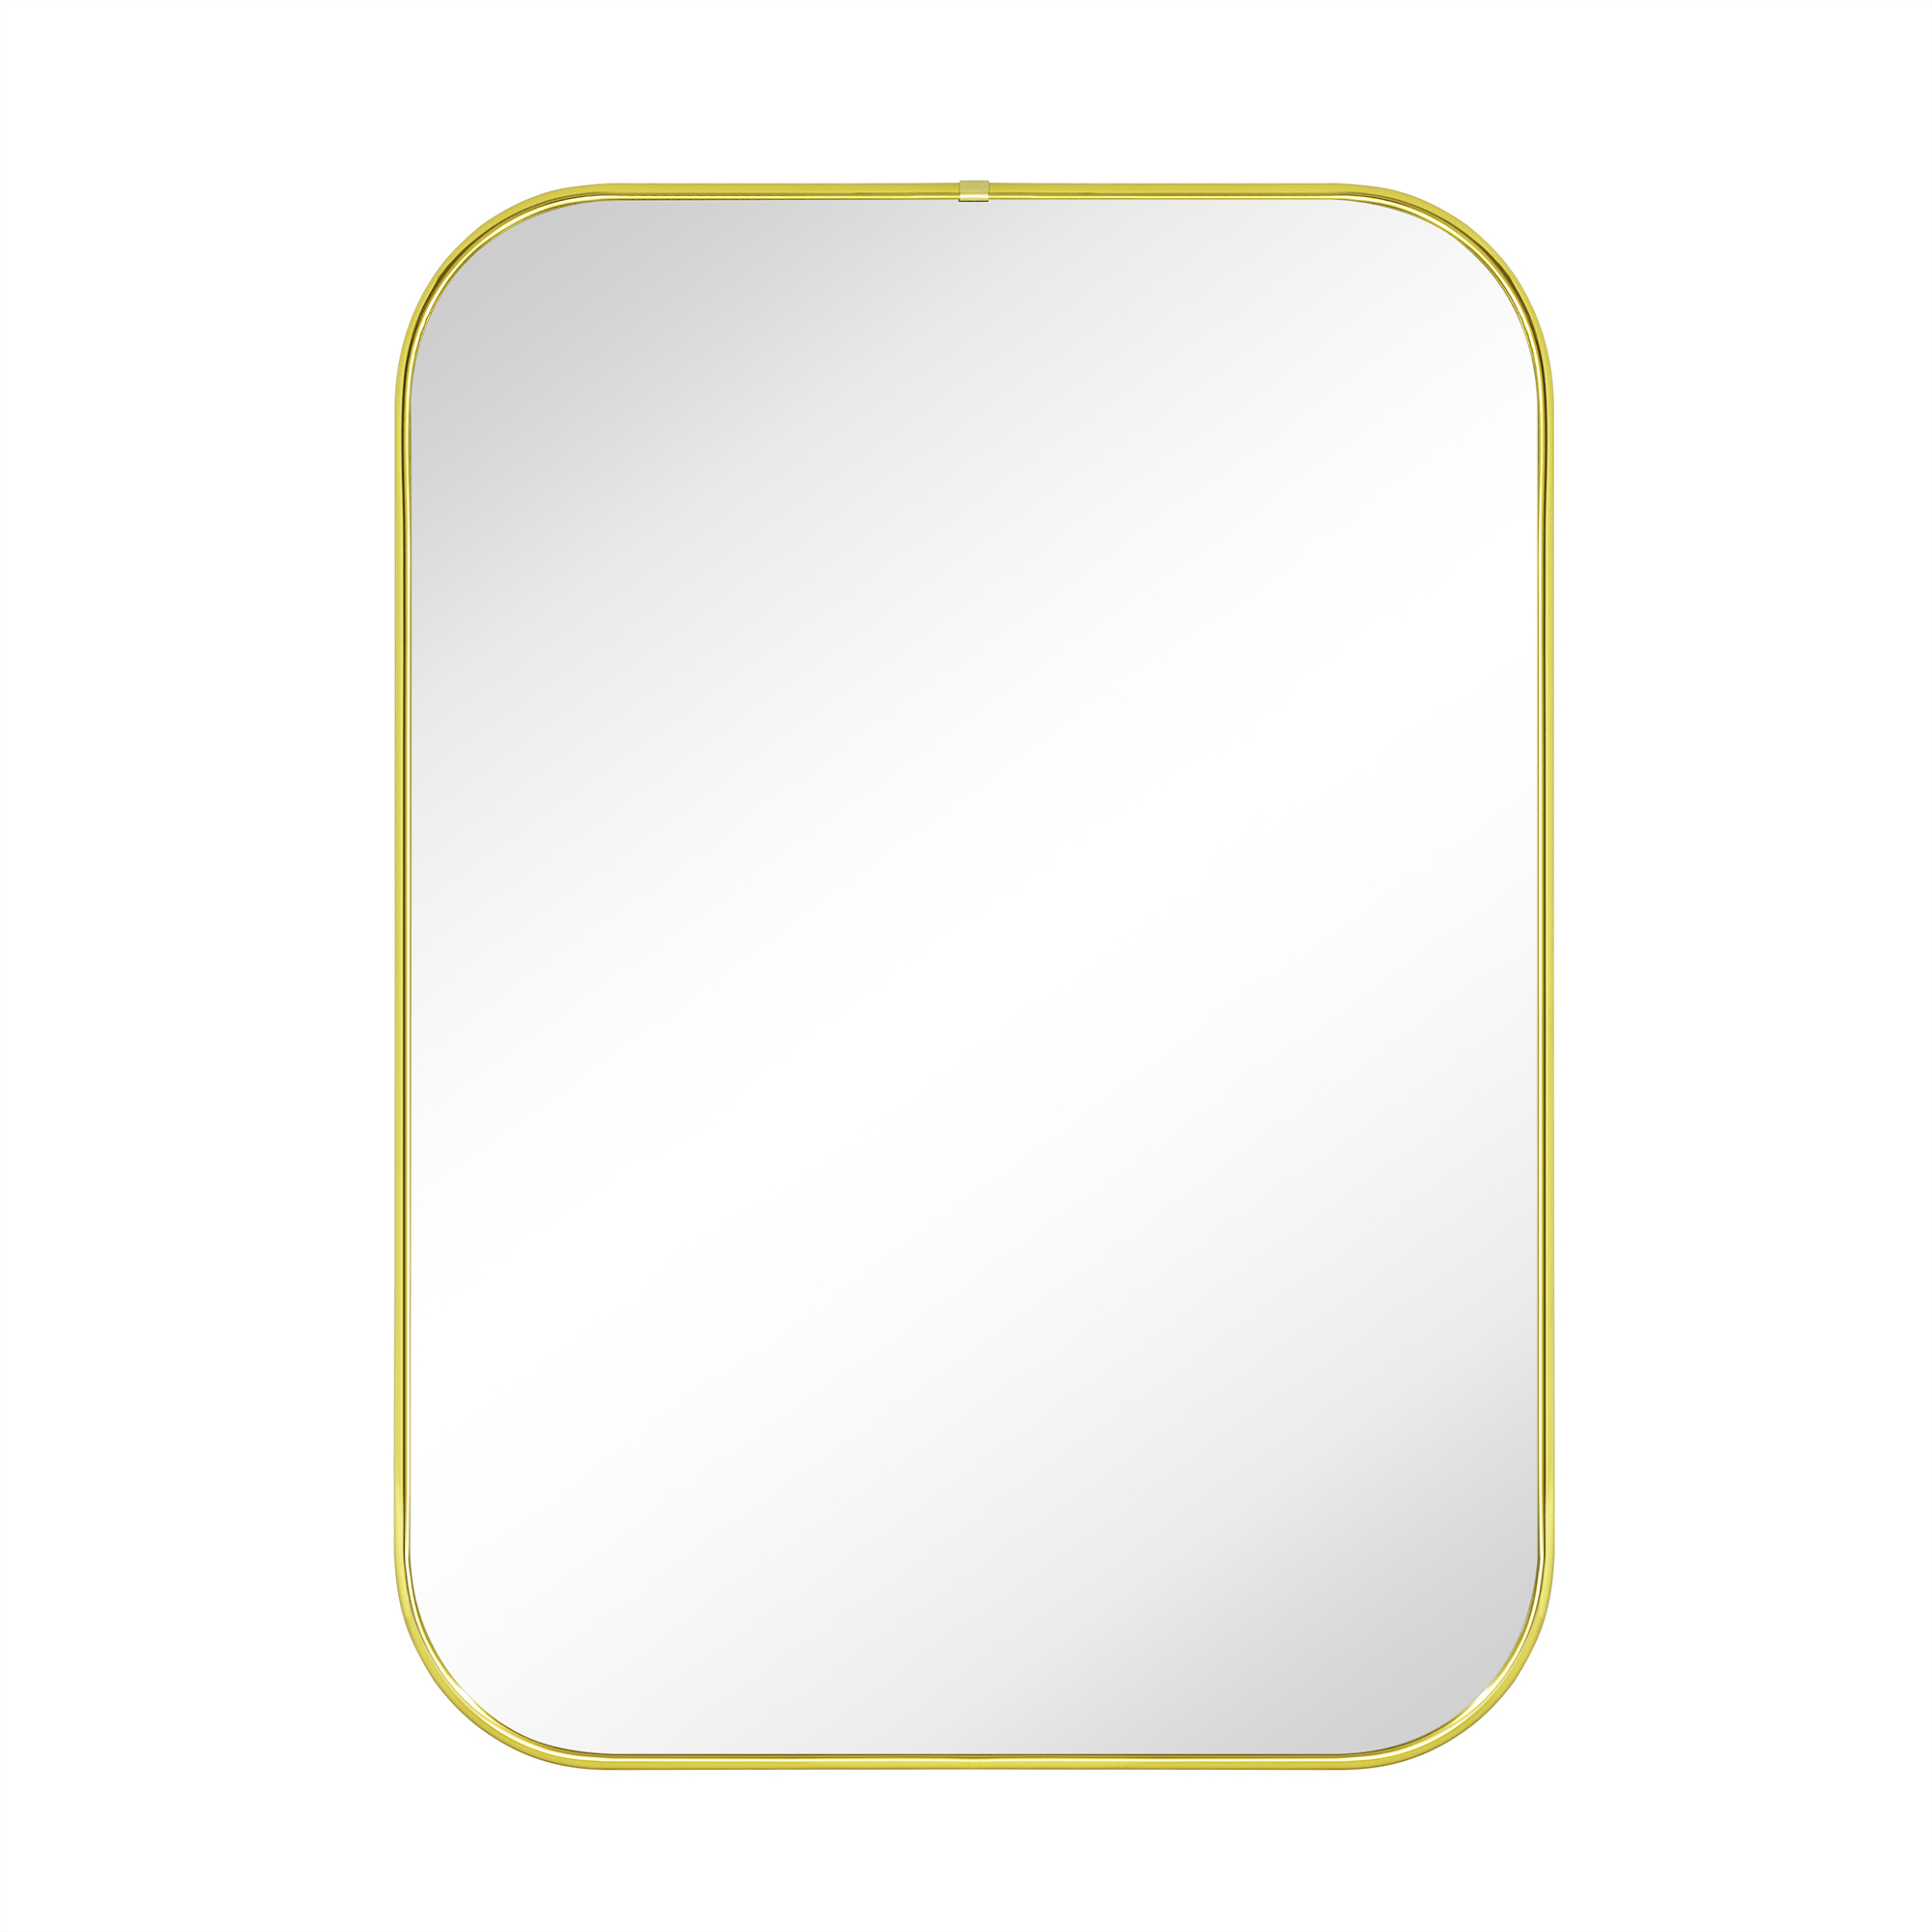 GRACTO Contemporary 30 by40 inches Gold Rounded Rectangle Bathroom Vanity Mirror 40x30'' Rectangular Gold Vanity Mirror